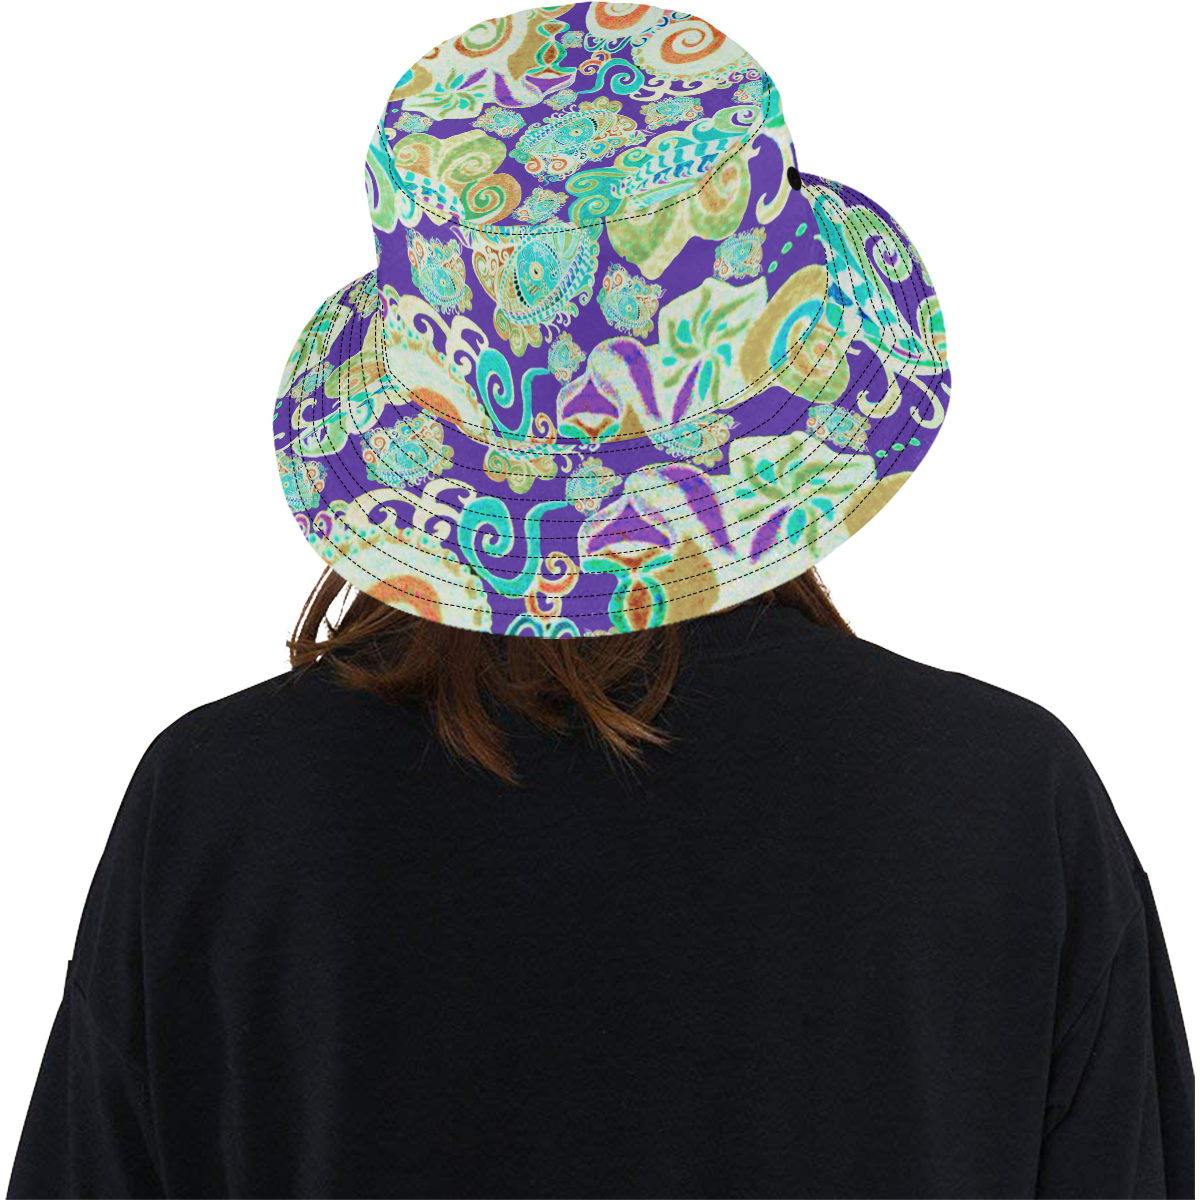 Your Paisley Blue Eyes by Aleta All Over Print Bucket Hat